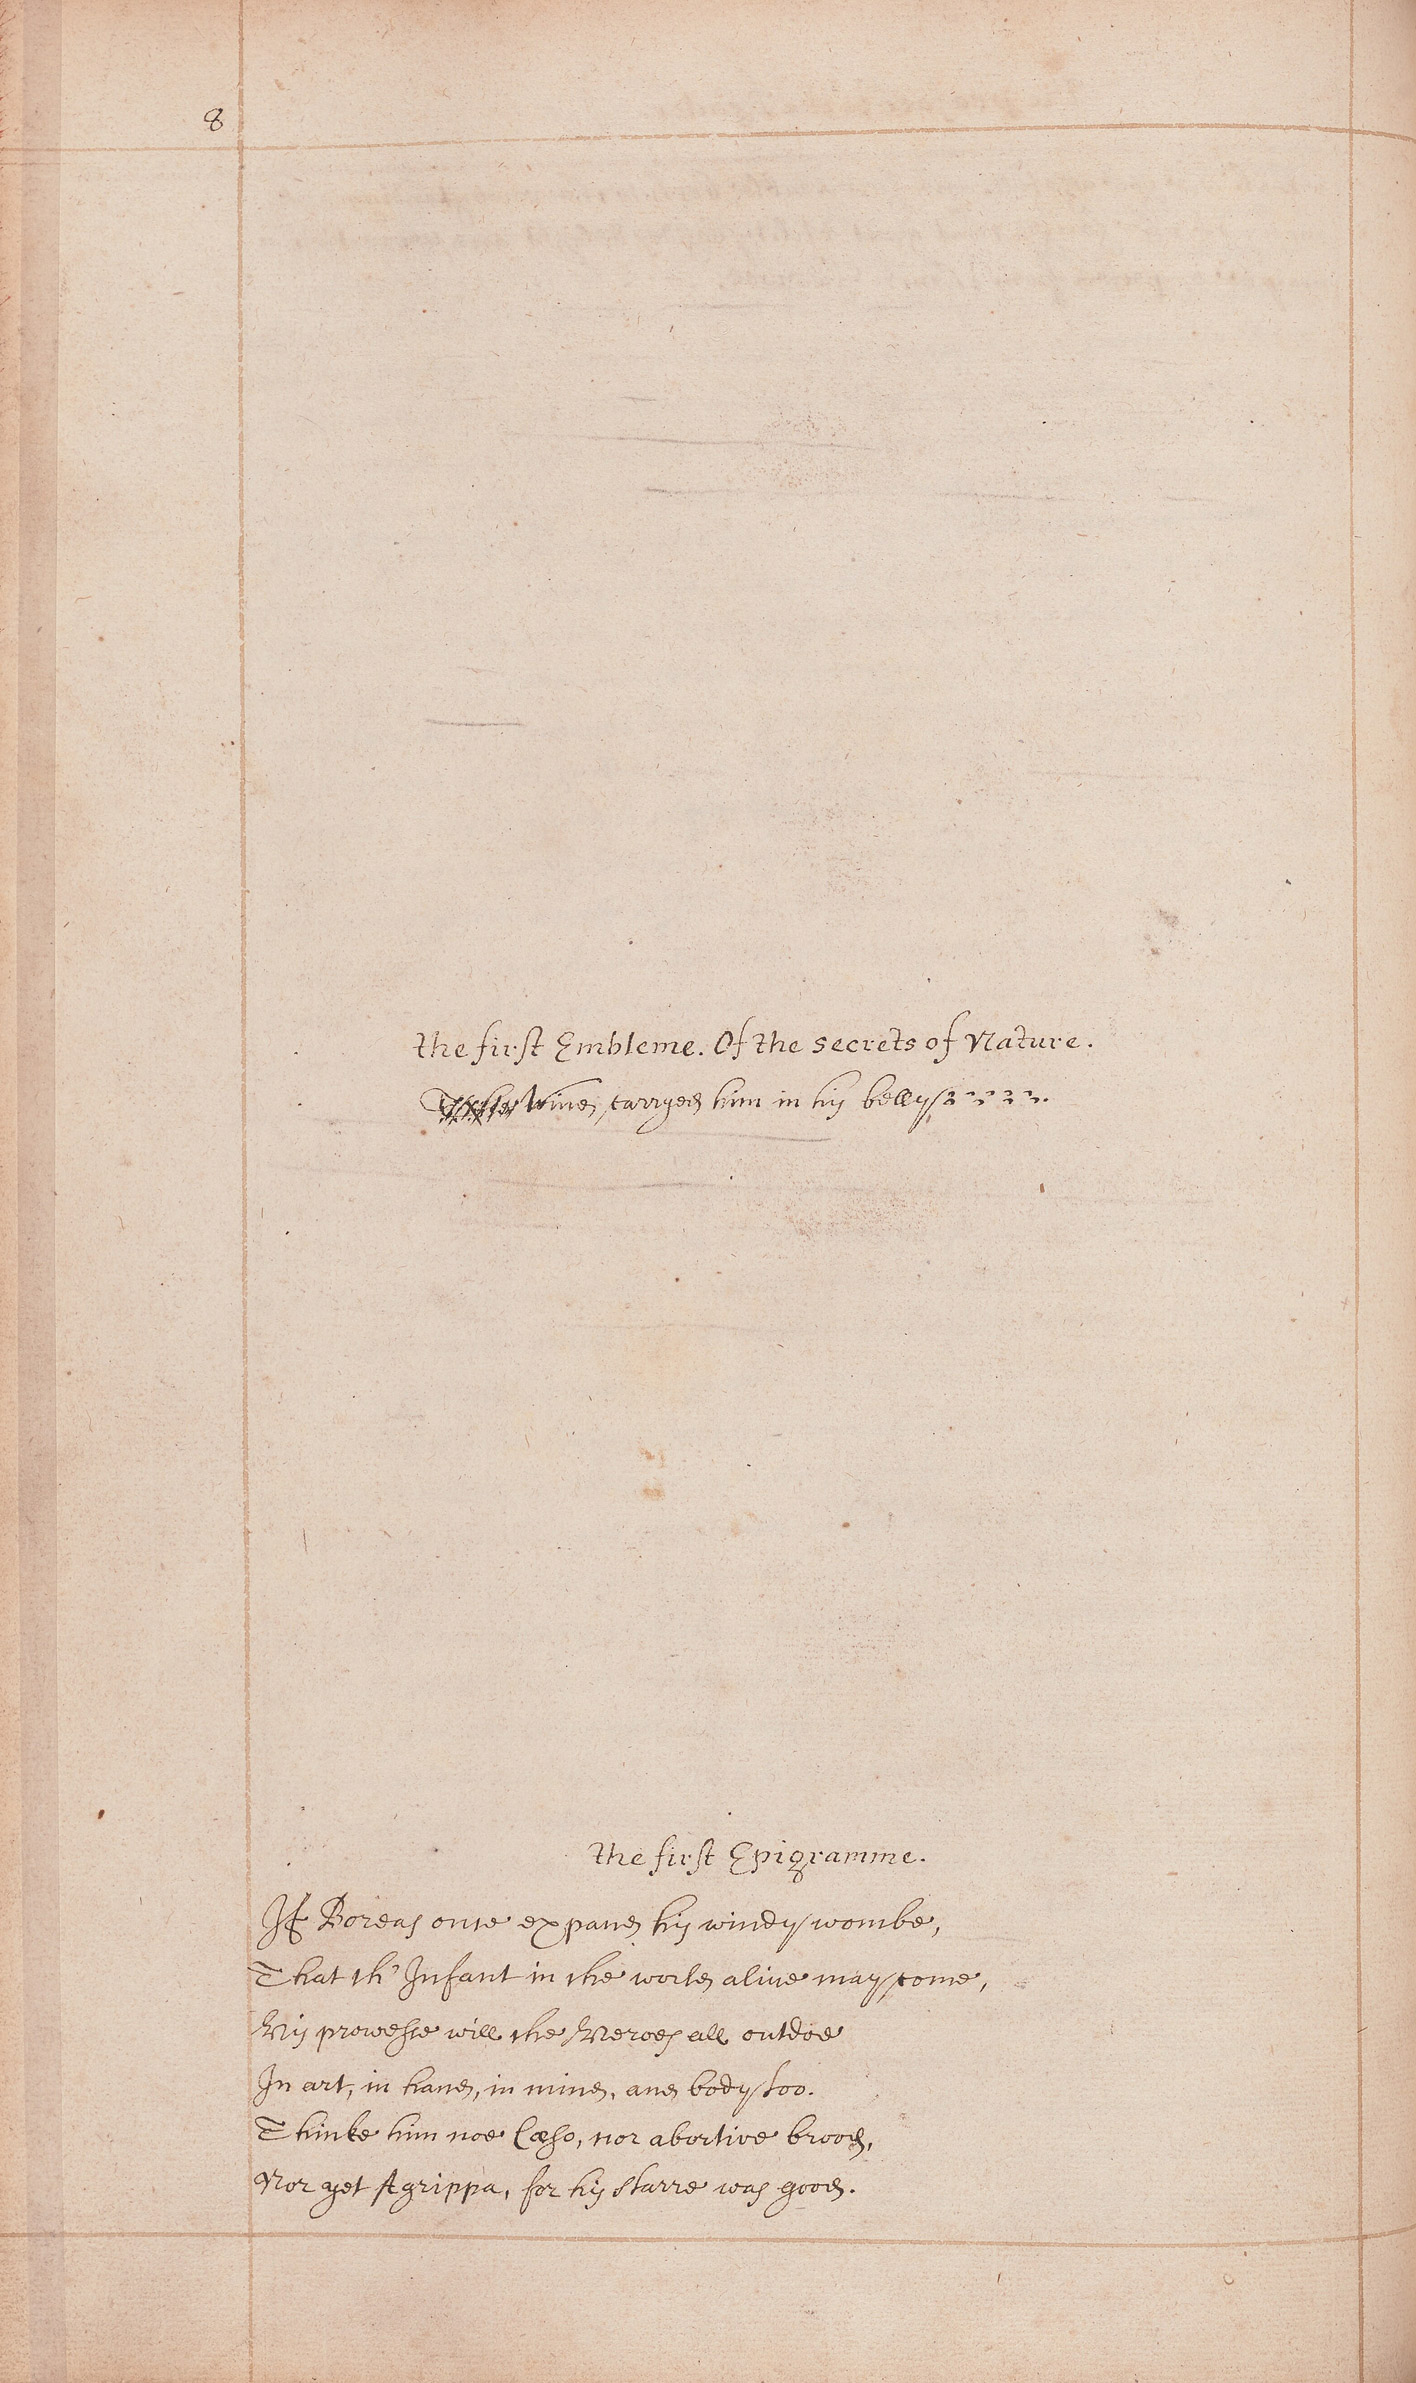 An unillustrated manuscript page from an English translation of Maier’s text.